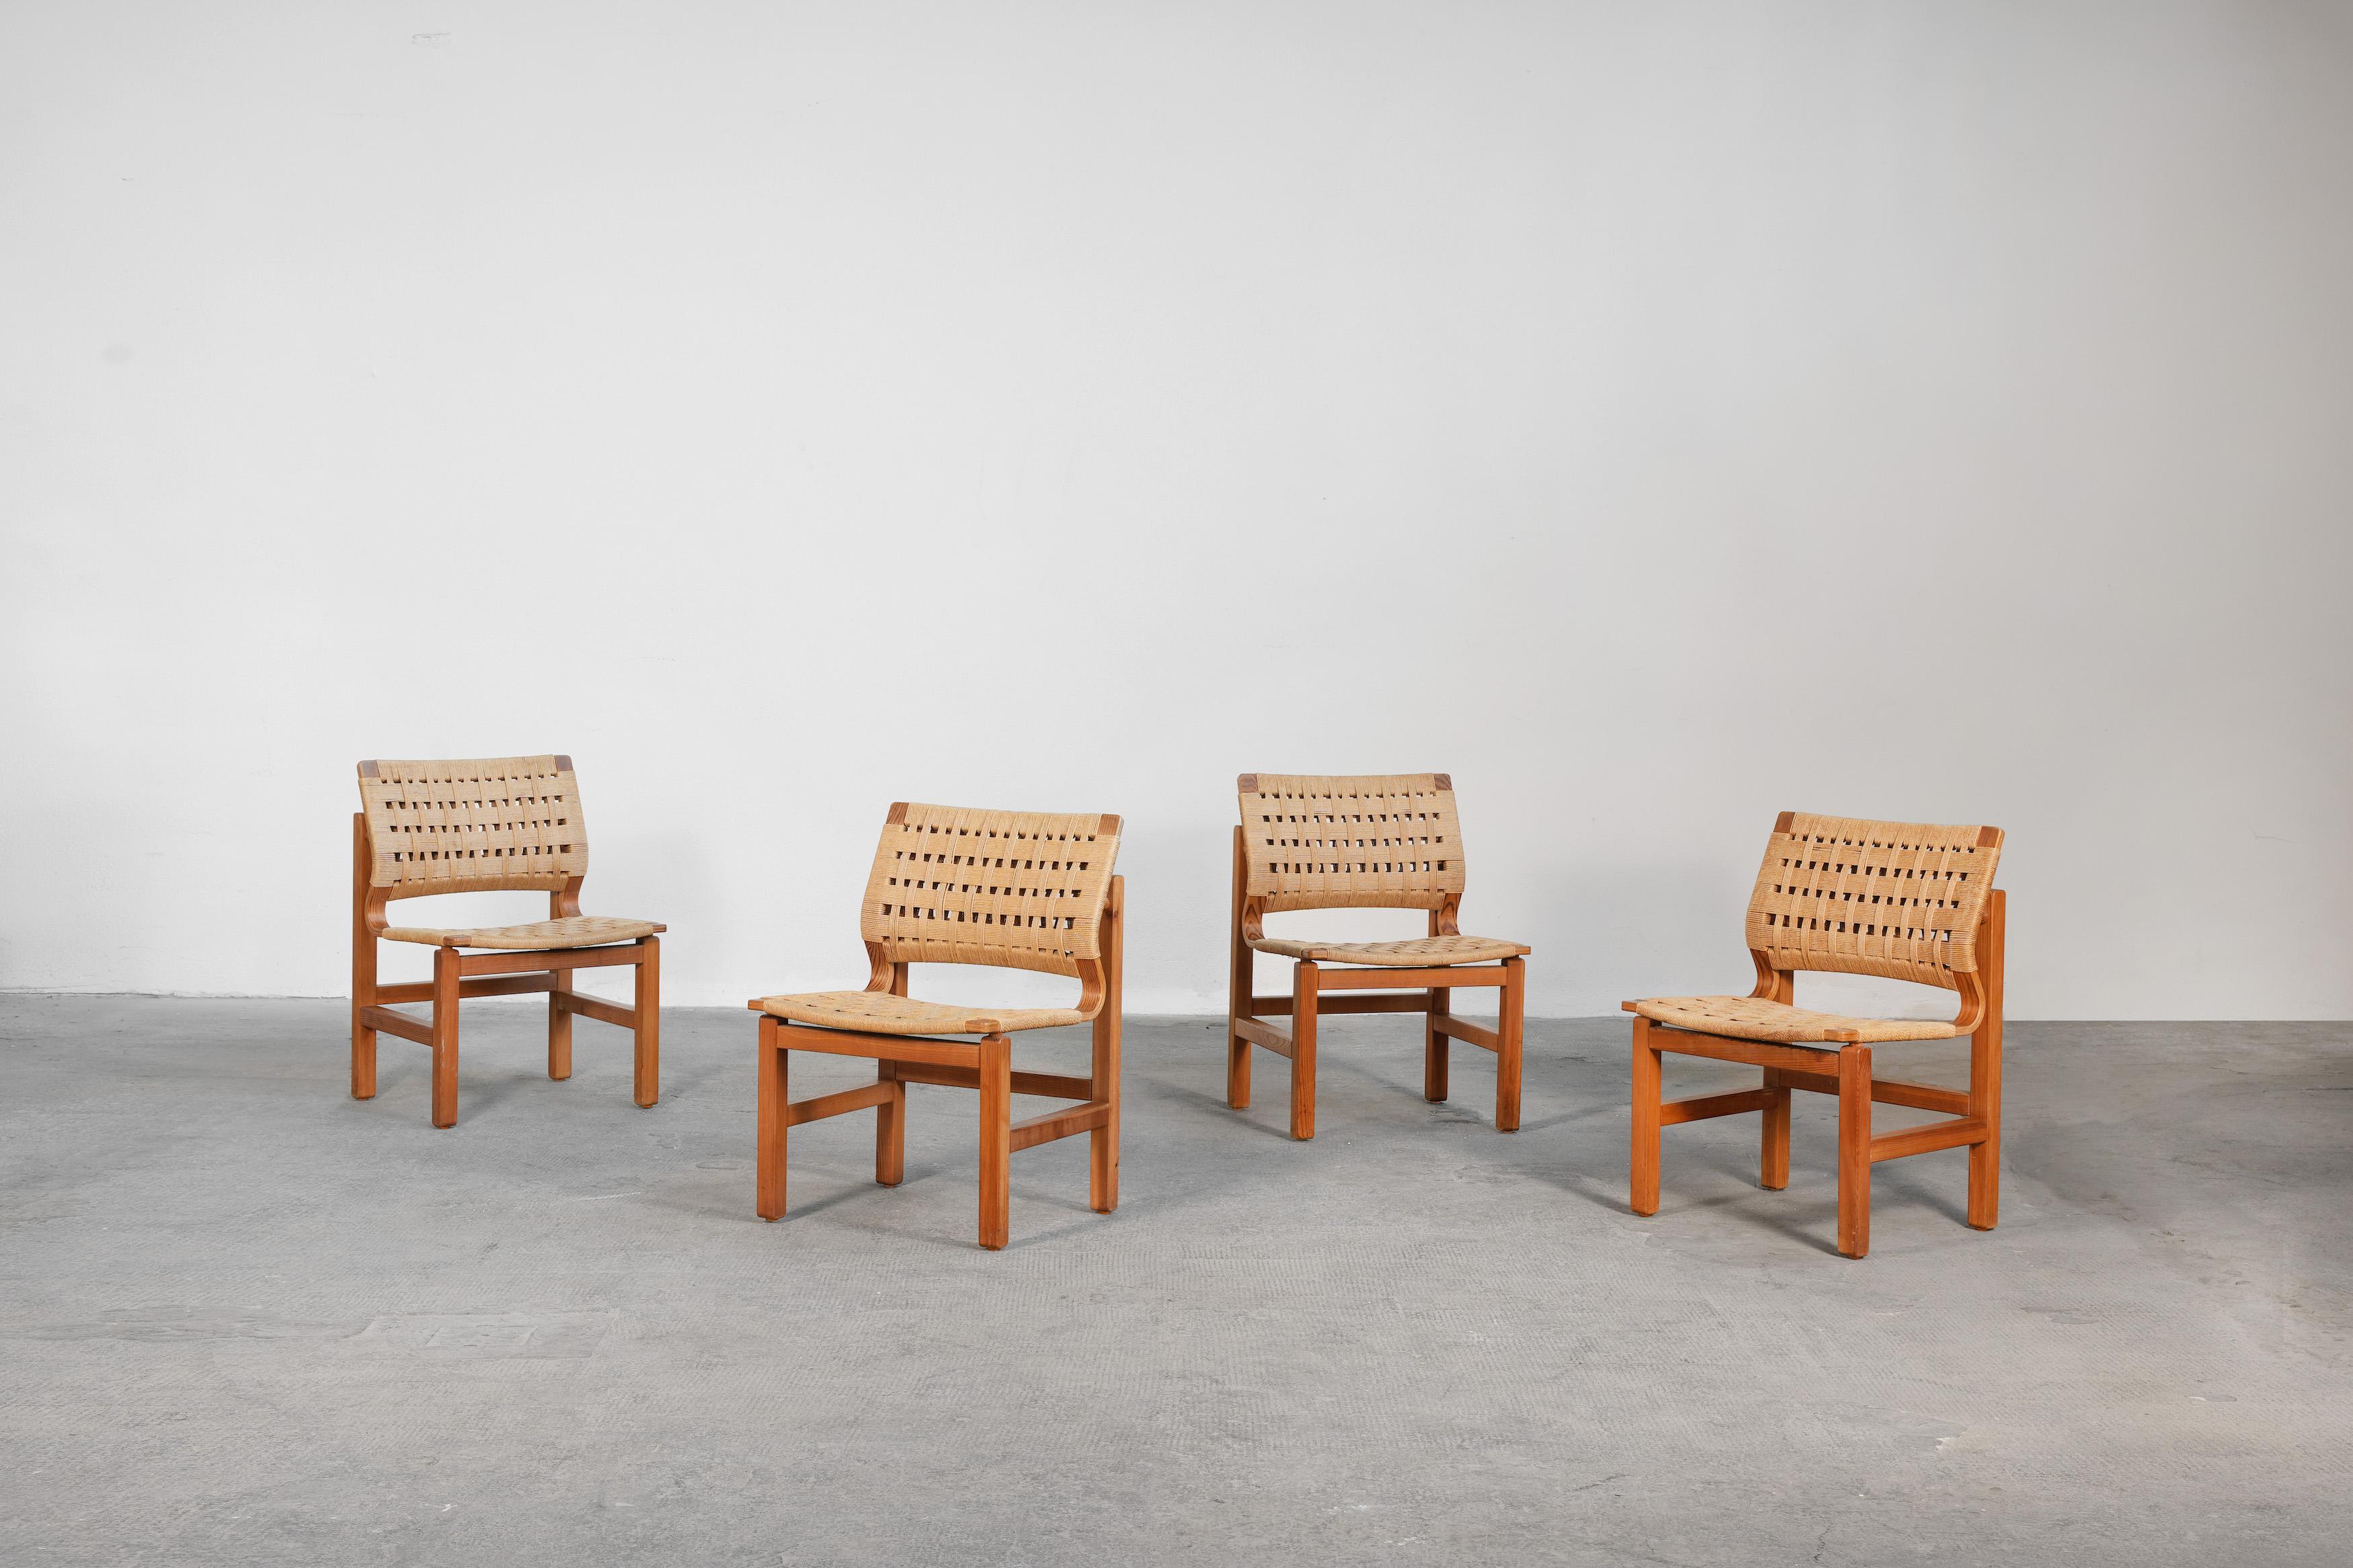 Set of 4 beautiful dining chairs in pitch pine and paper cord. 
Designed by Vagn Fuglsang and manufactured by Collection Fuglsang, Denmark in the 1970s.
All chairs are in very good original condition without any damage. 

We offer worldwide